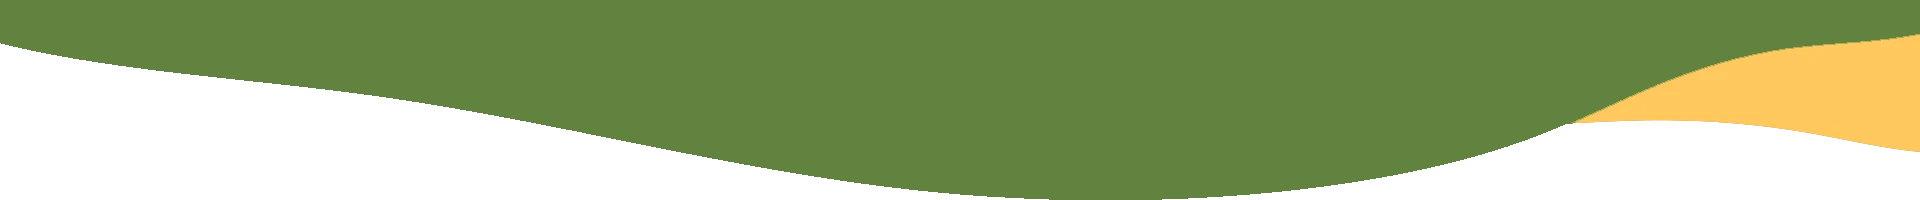 r212-element-green-16836499717413.png